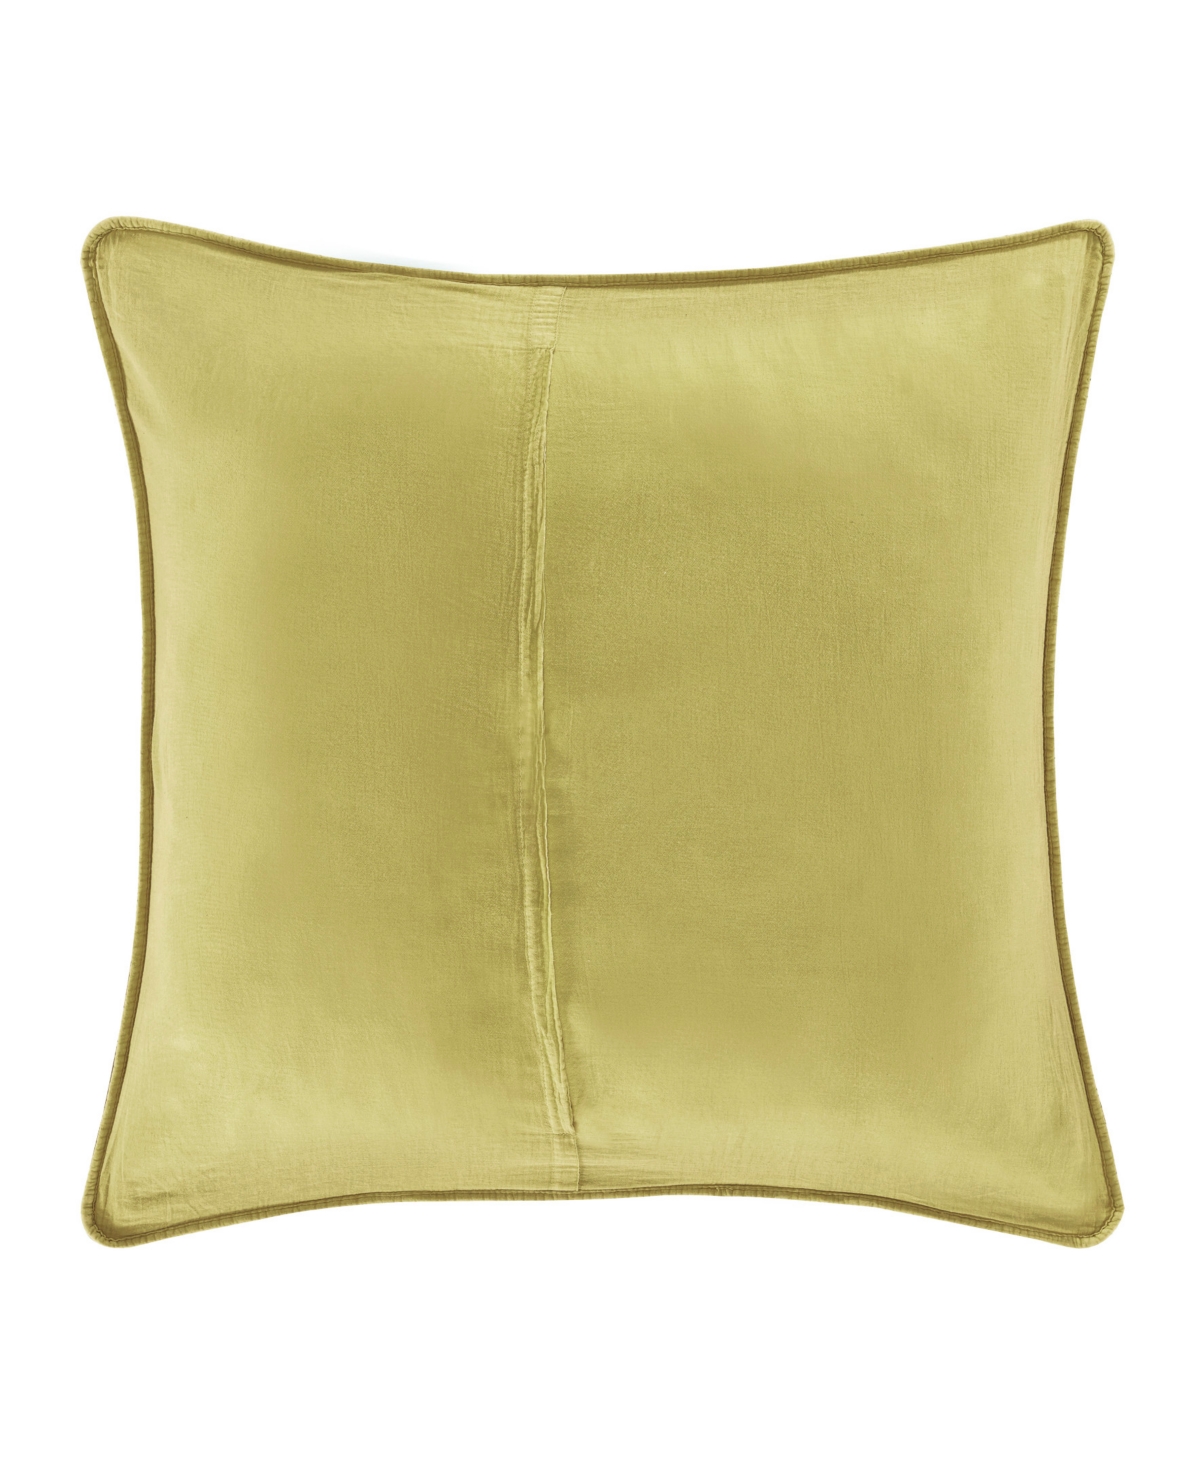 Cayman Quilted Sham, European - Chartreuse